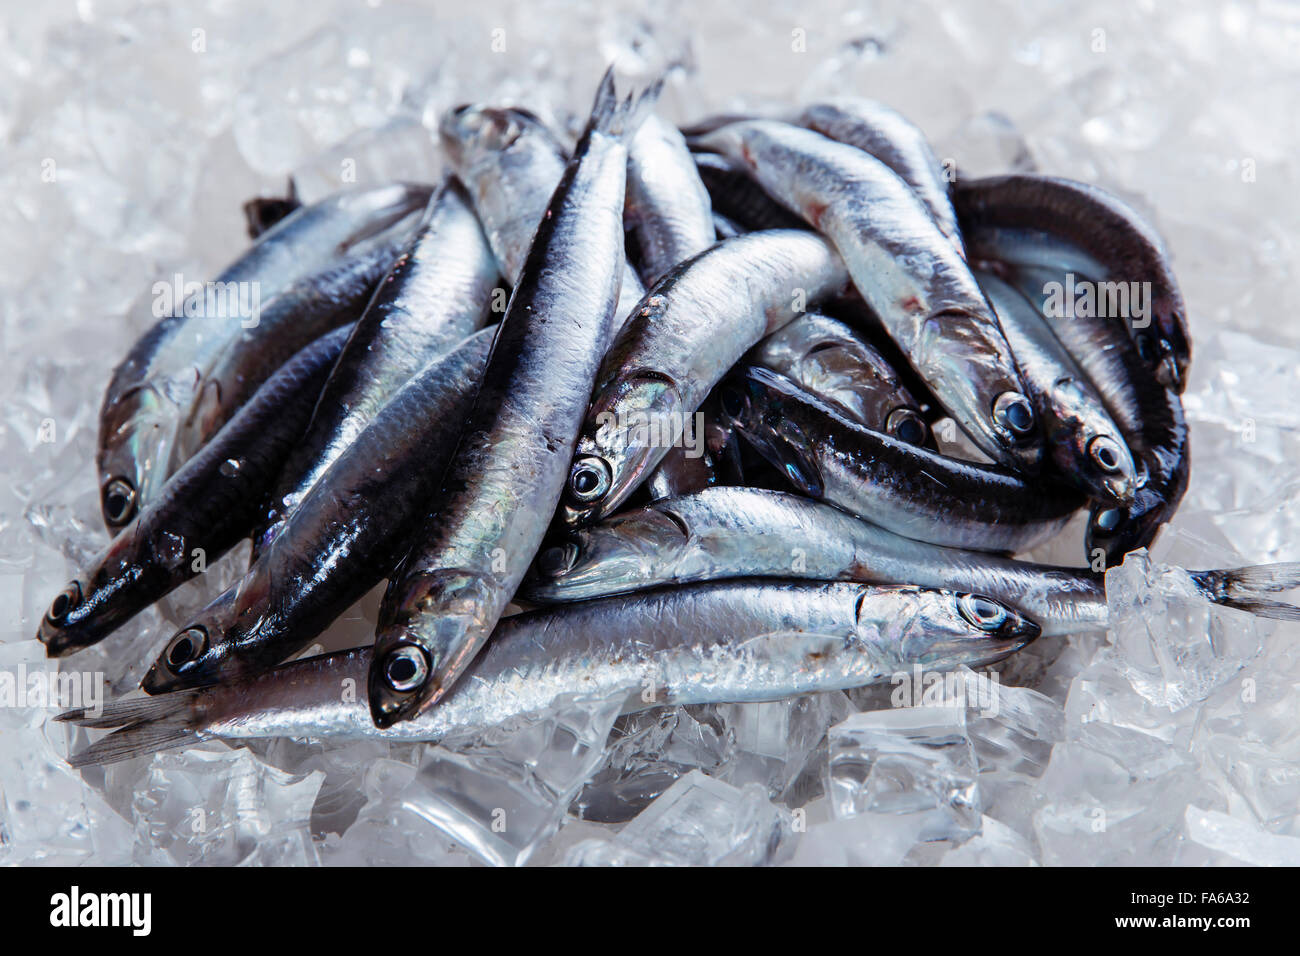 fresh raw fish anchovy on ice seafood Stock Photo